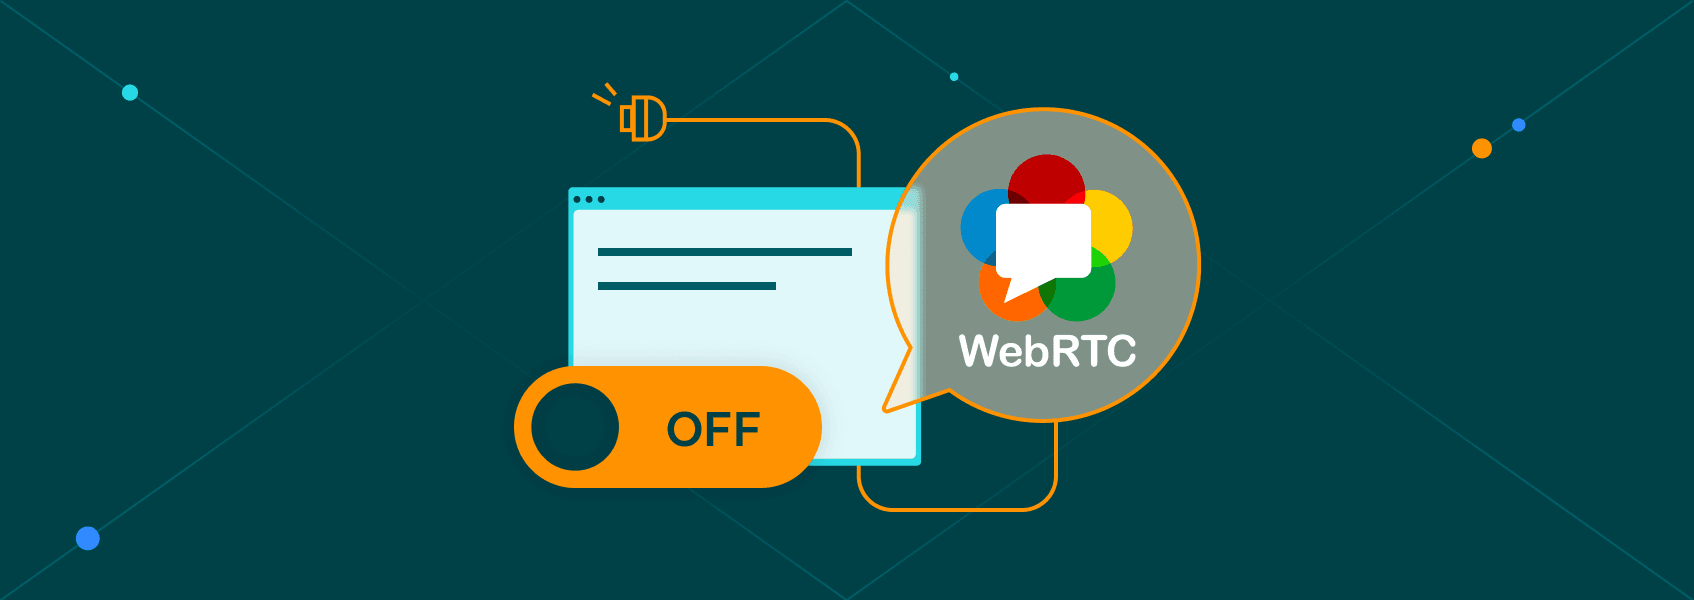 How to Disable WebRTC in Your Browser